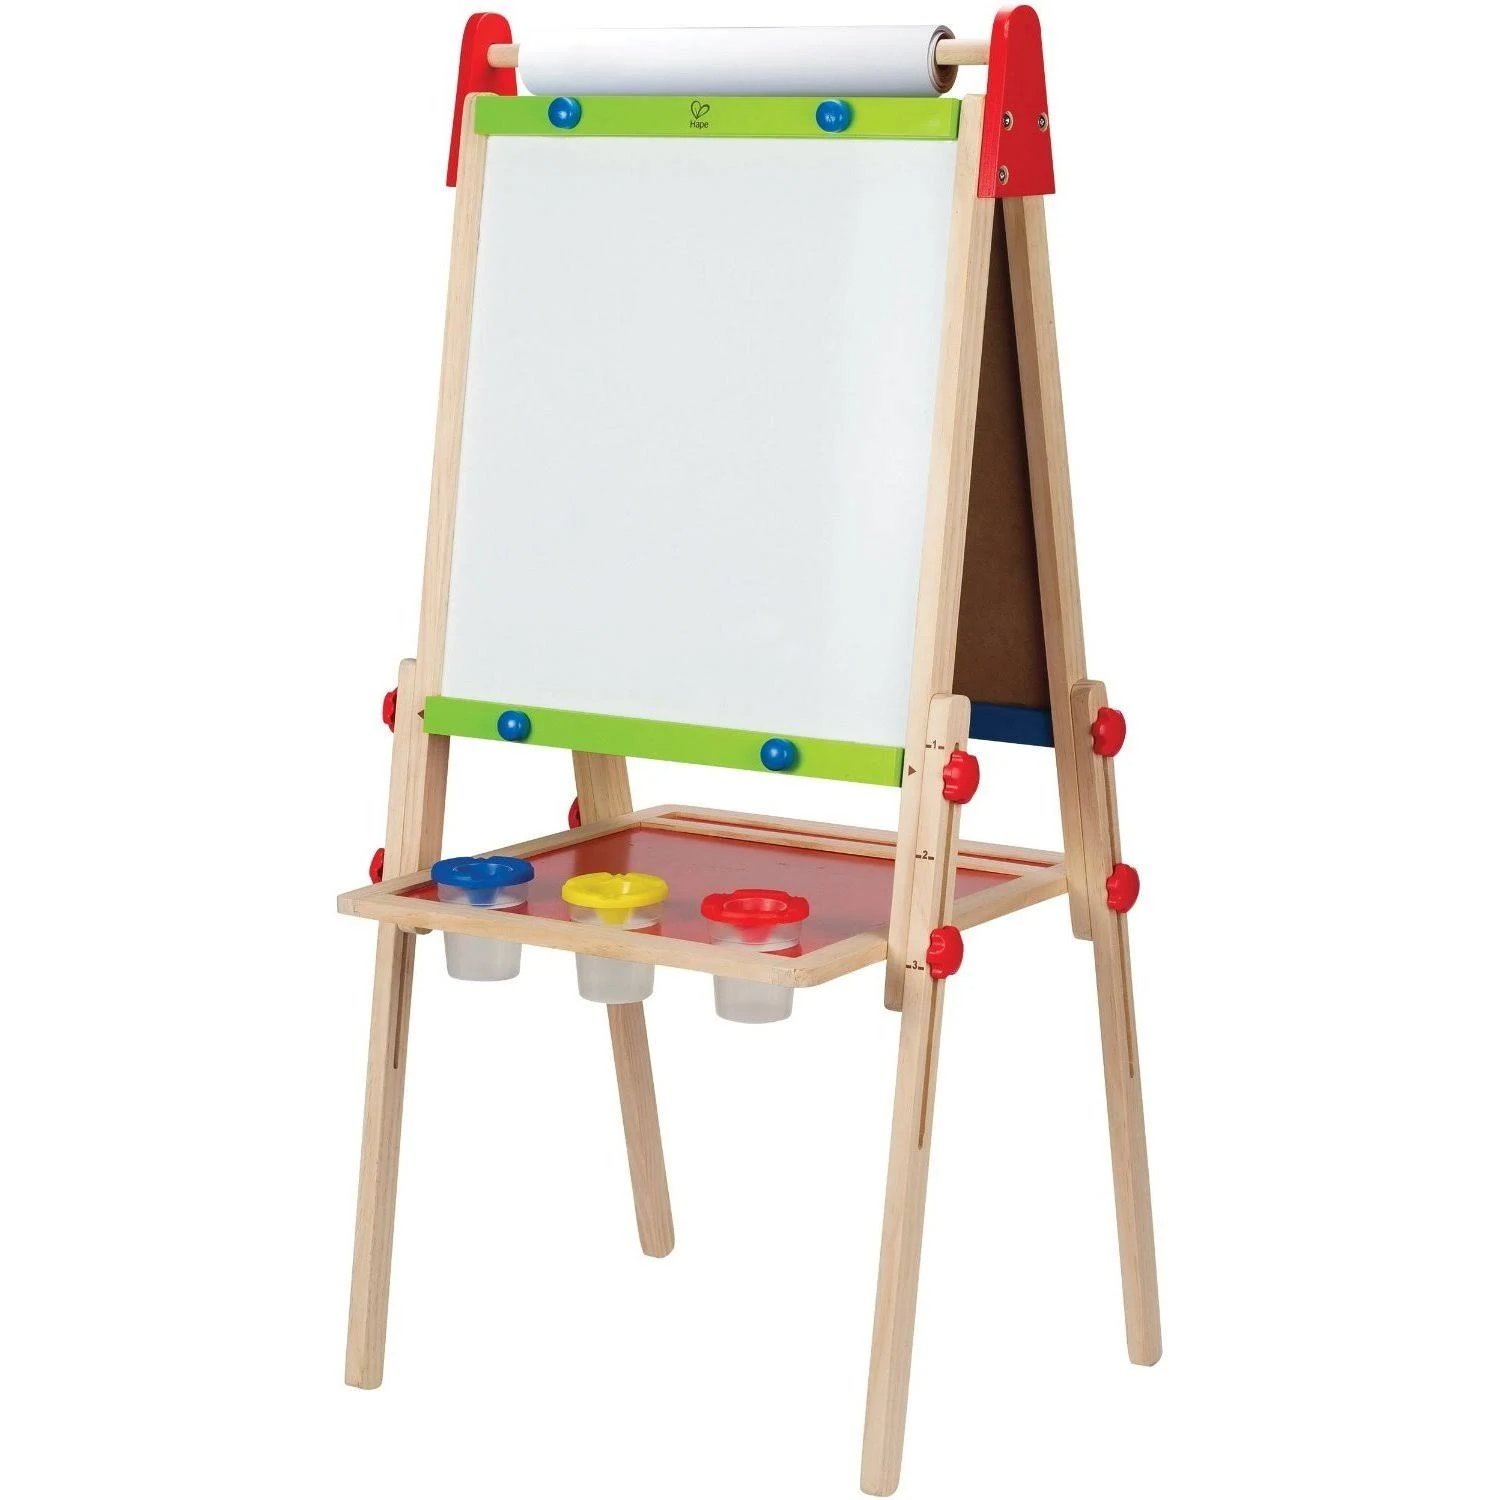 Hape all-in-one Wooden Art Easel